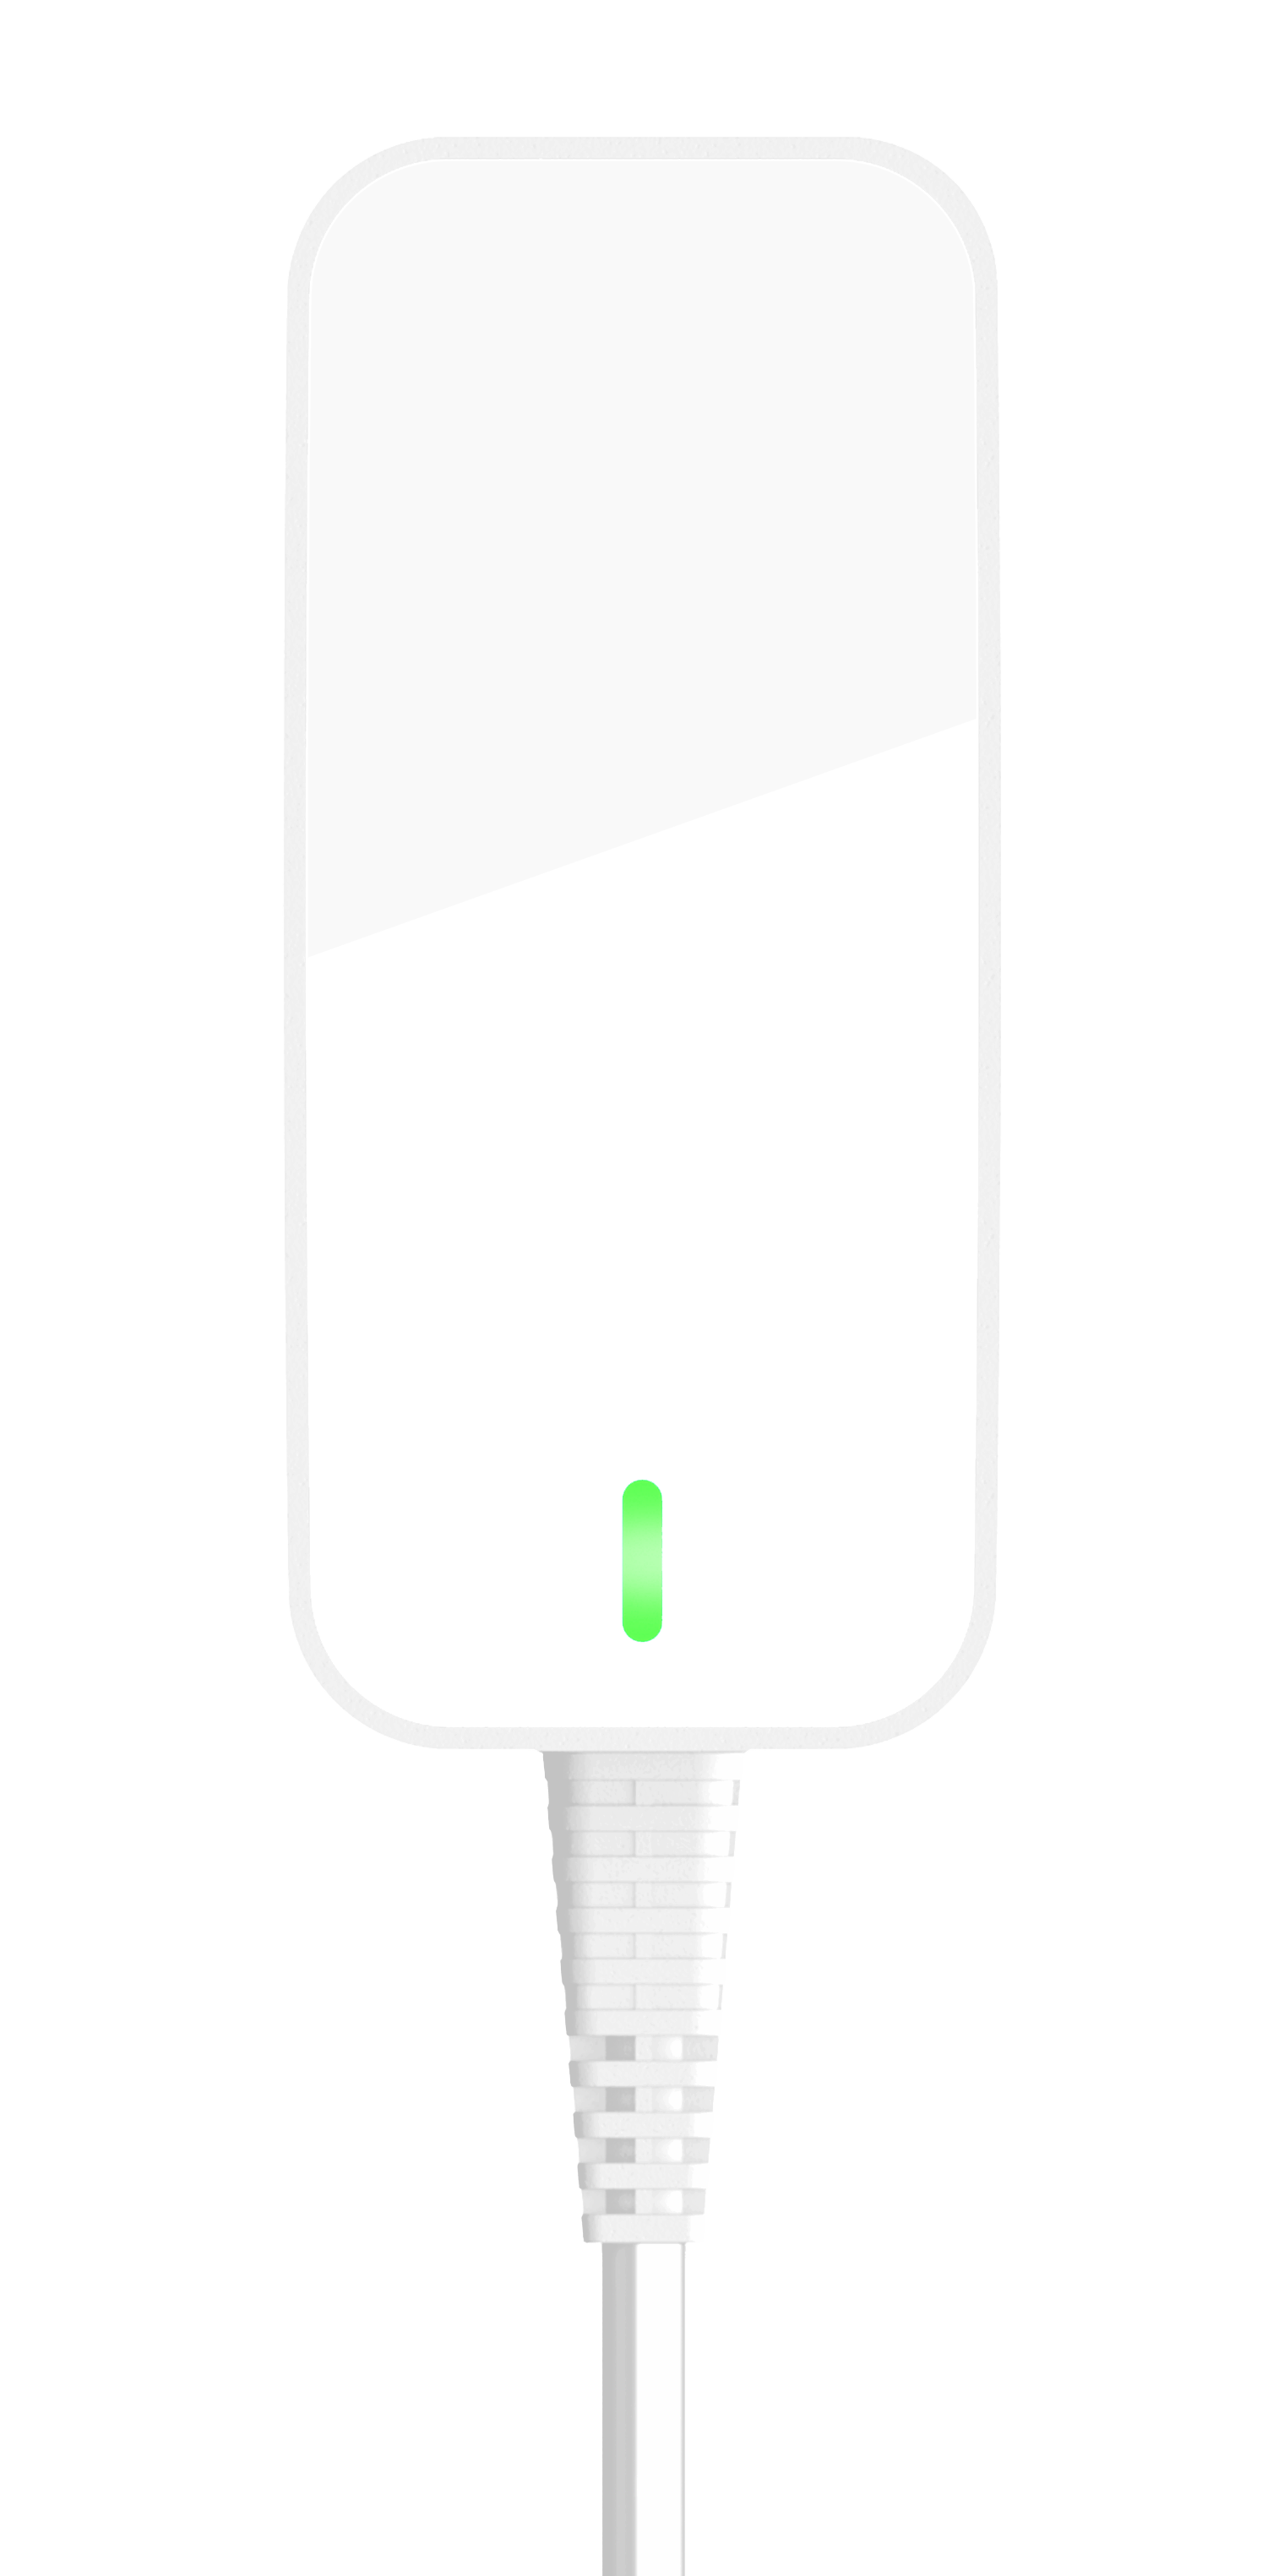 A white power supply charger with a green light on it.